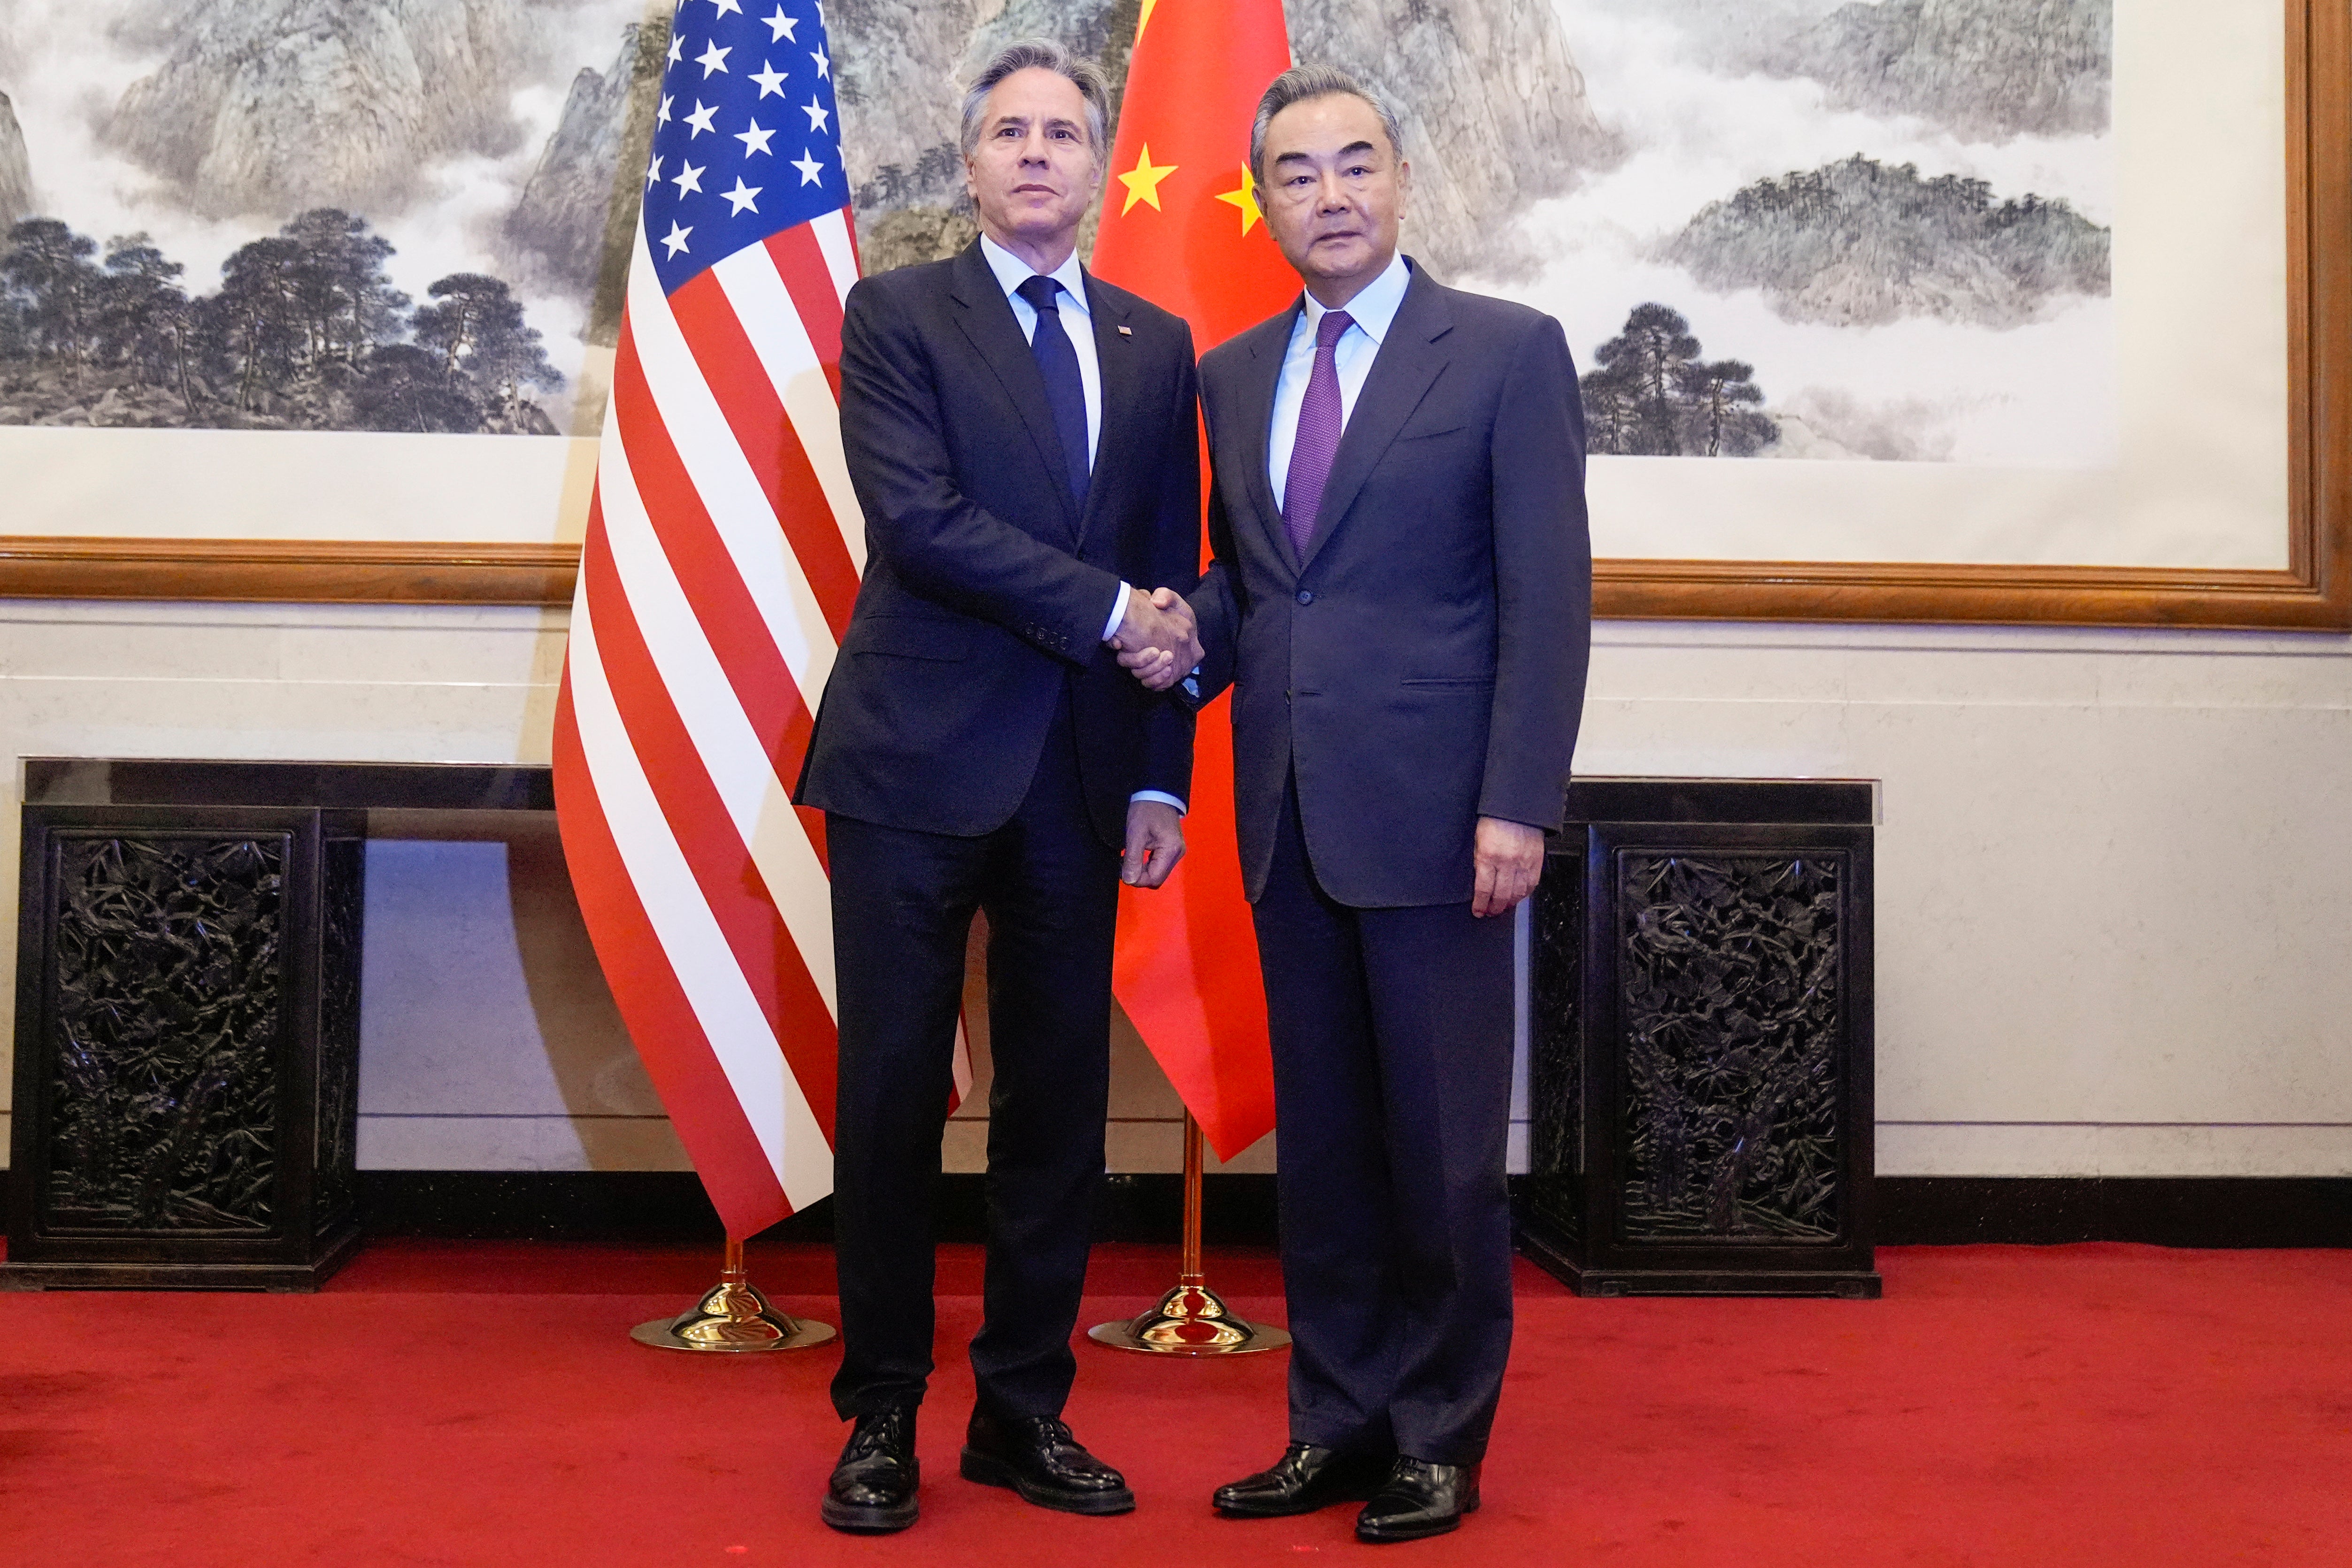 US secretary of state Antony Blinken shakes hands with China’s foreign minister Wang Yi during a meeting at the Diaoyutai State Guesthouse in Beijing on 26 April 2024